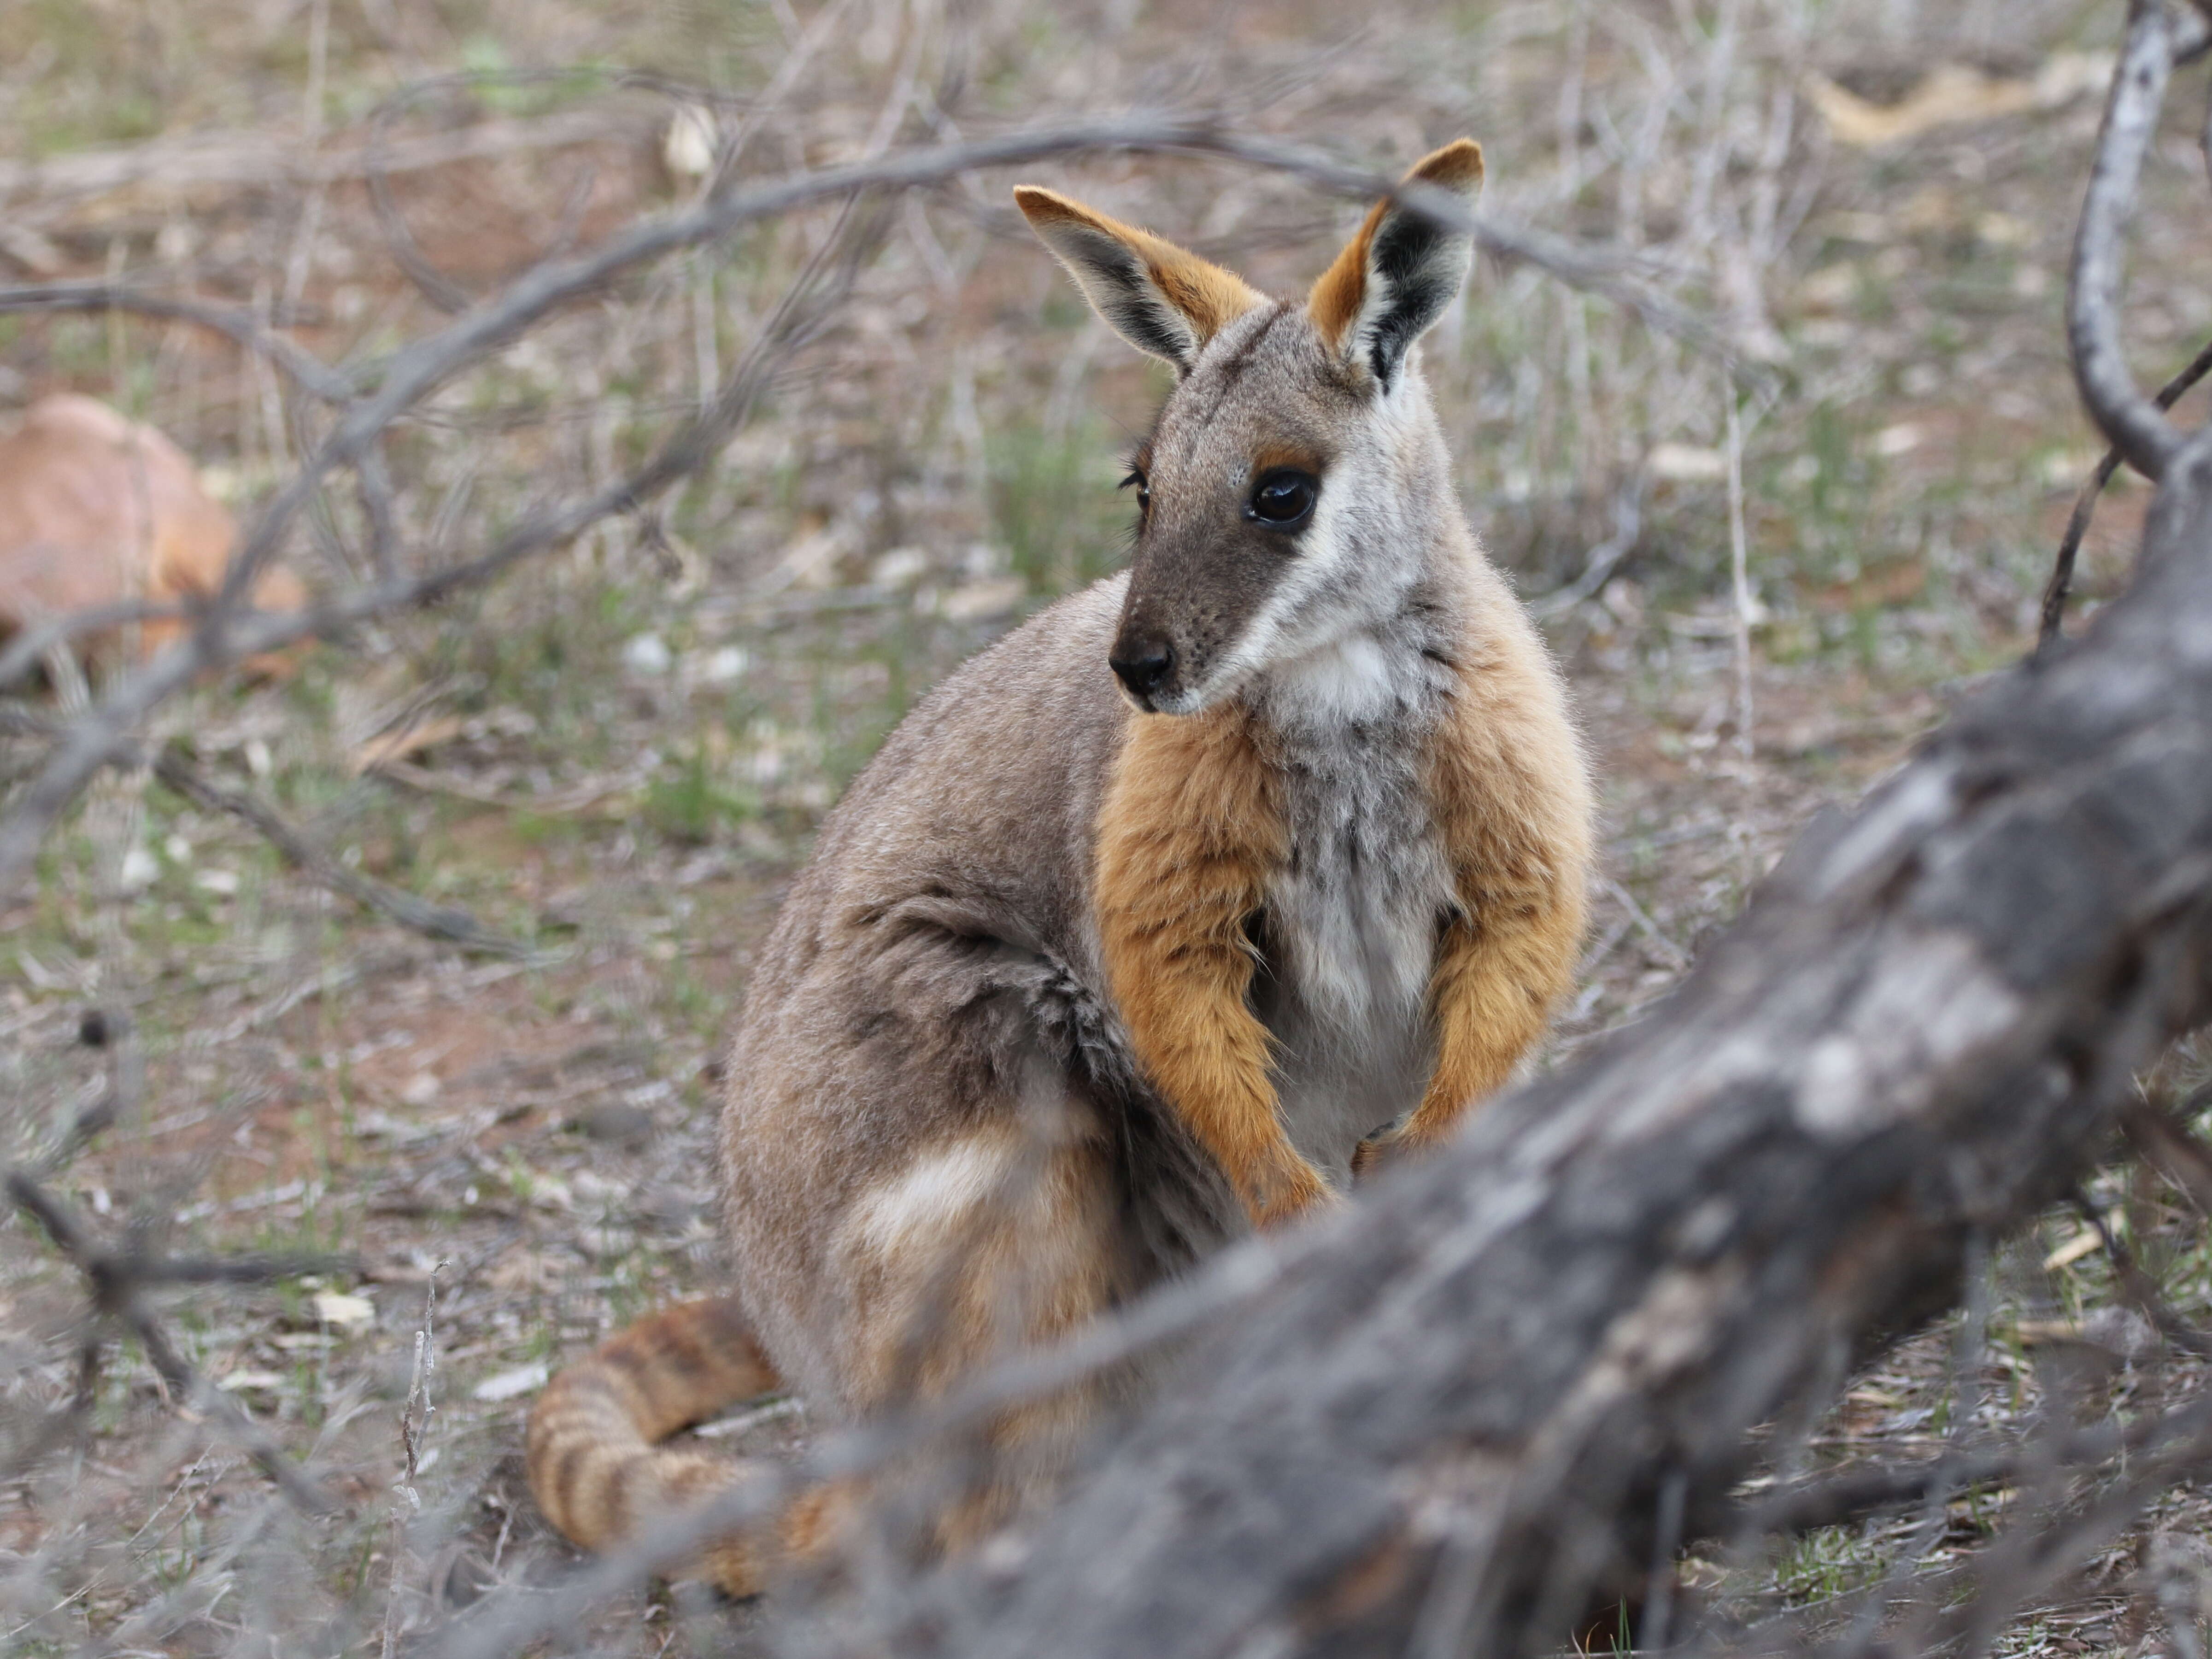 Image of Ring-tailed Rock Wallaby